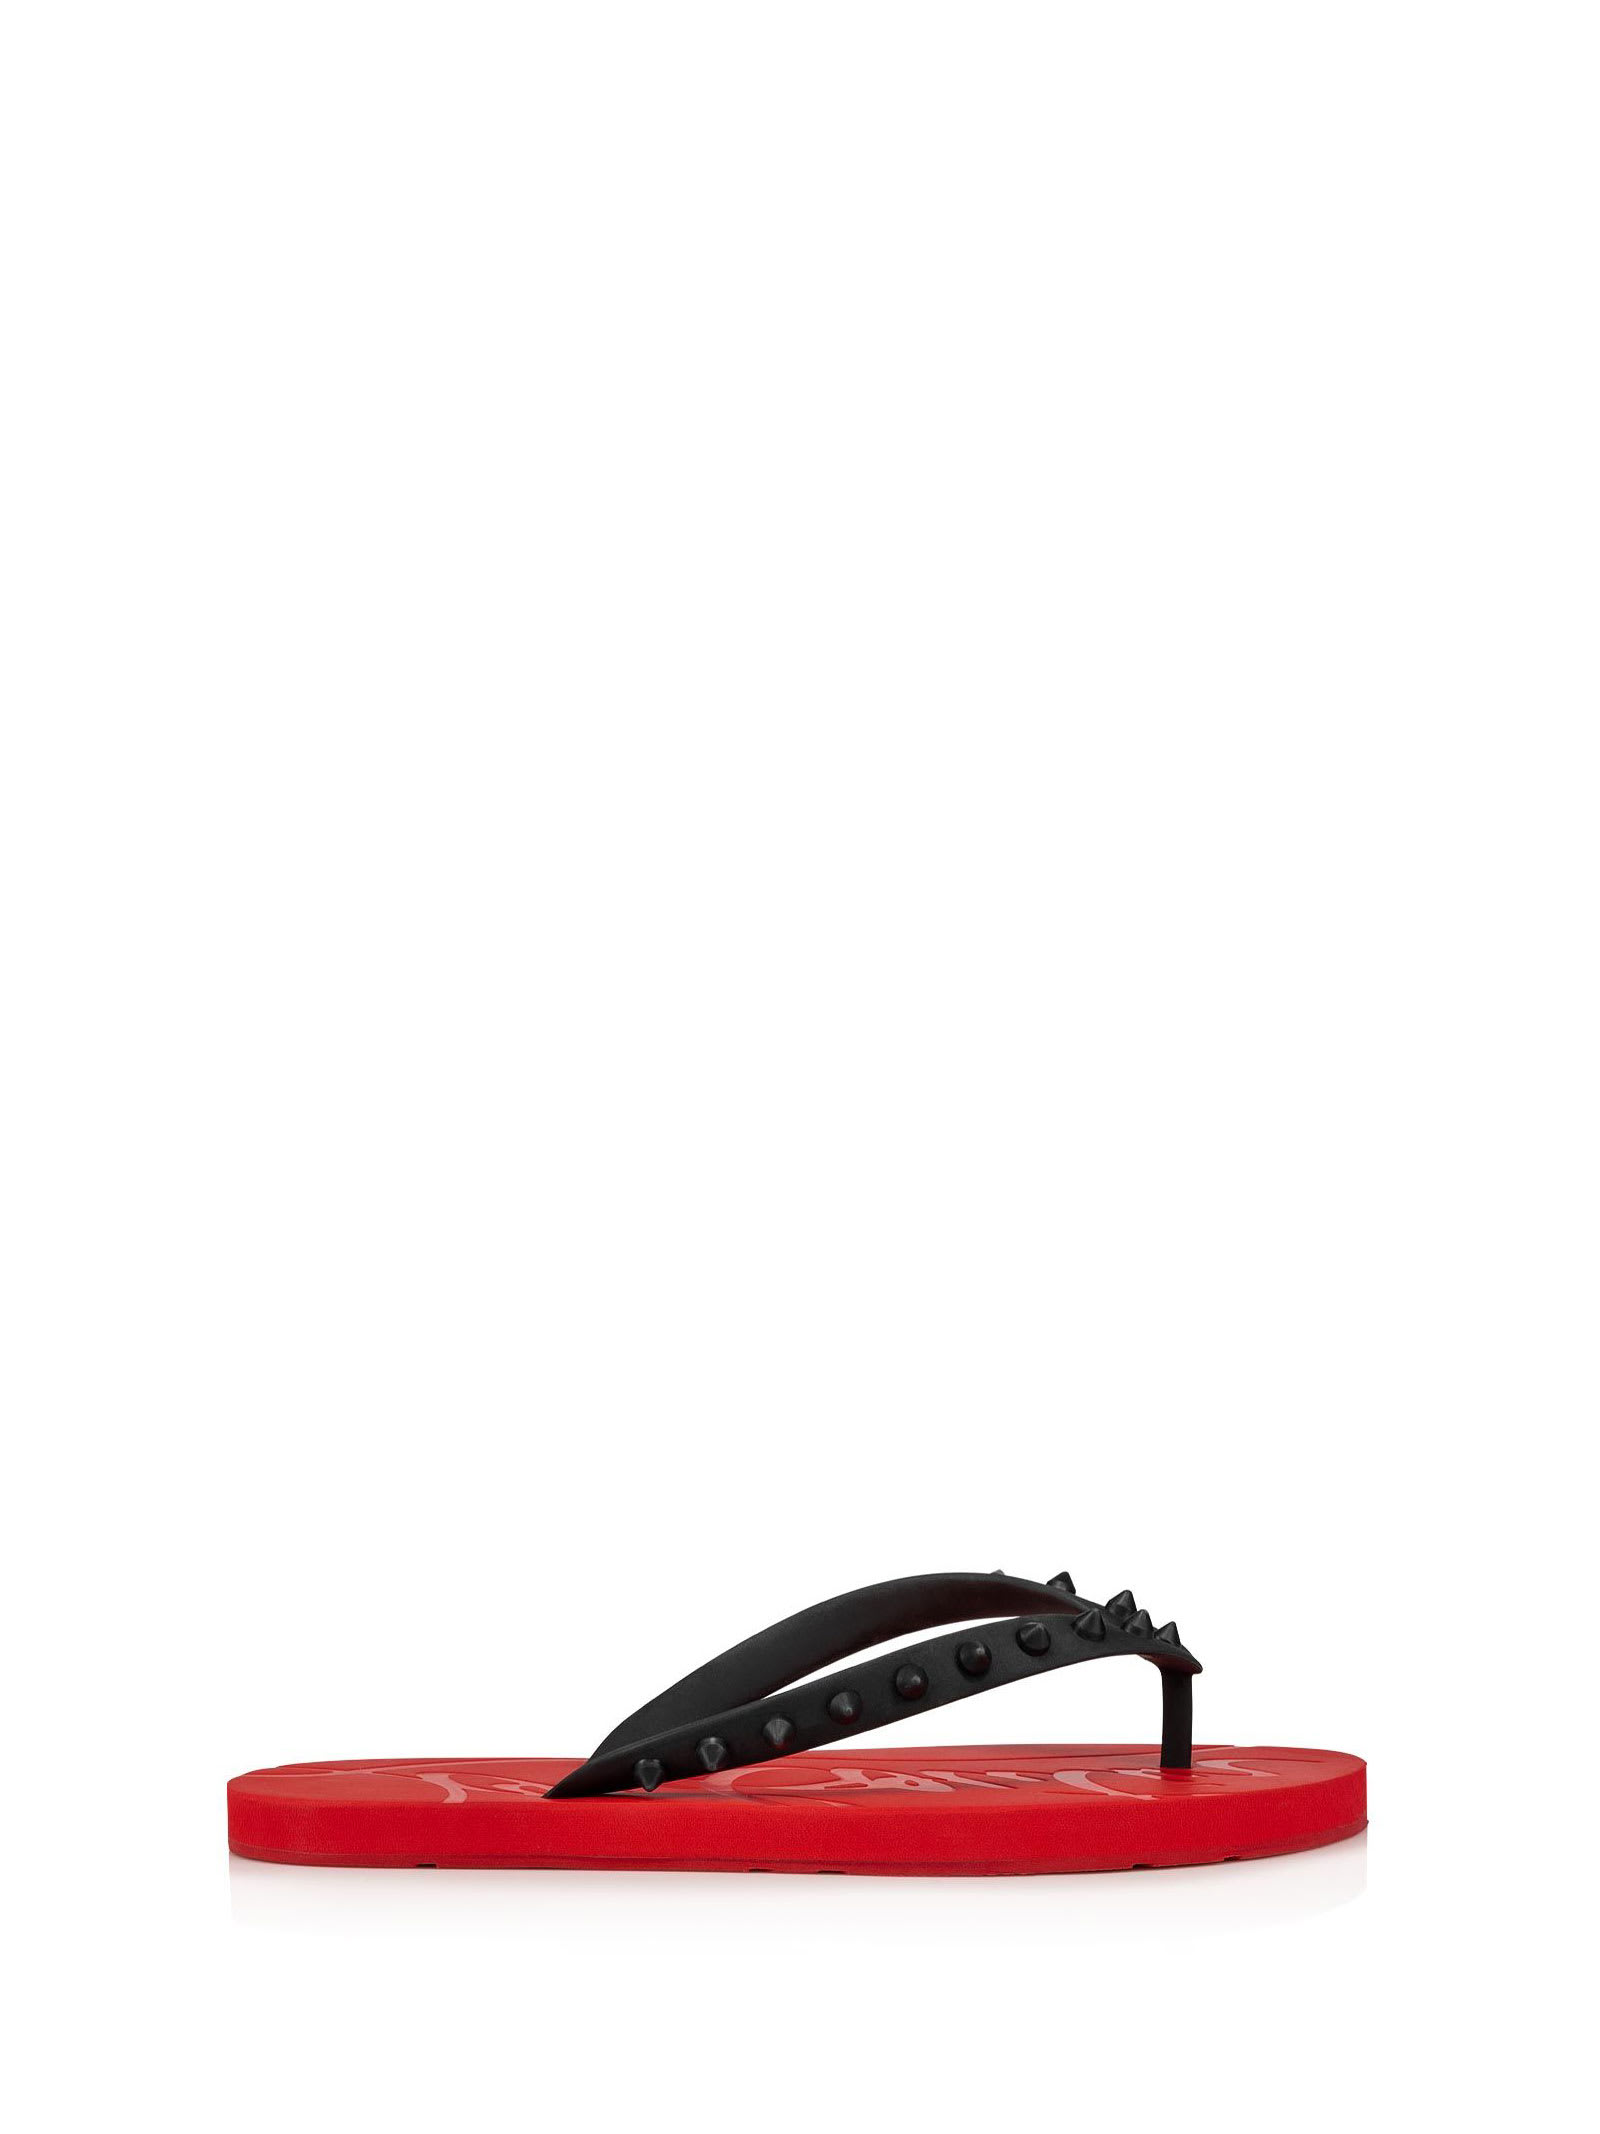 Christian Louboutin Flip Flop With Studs